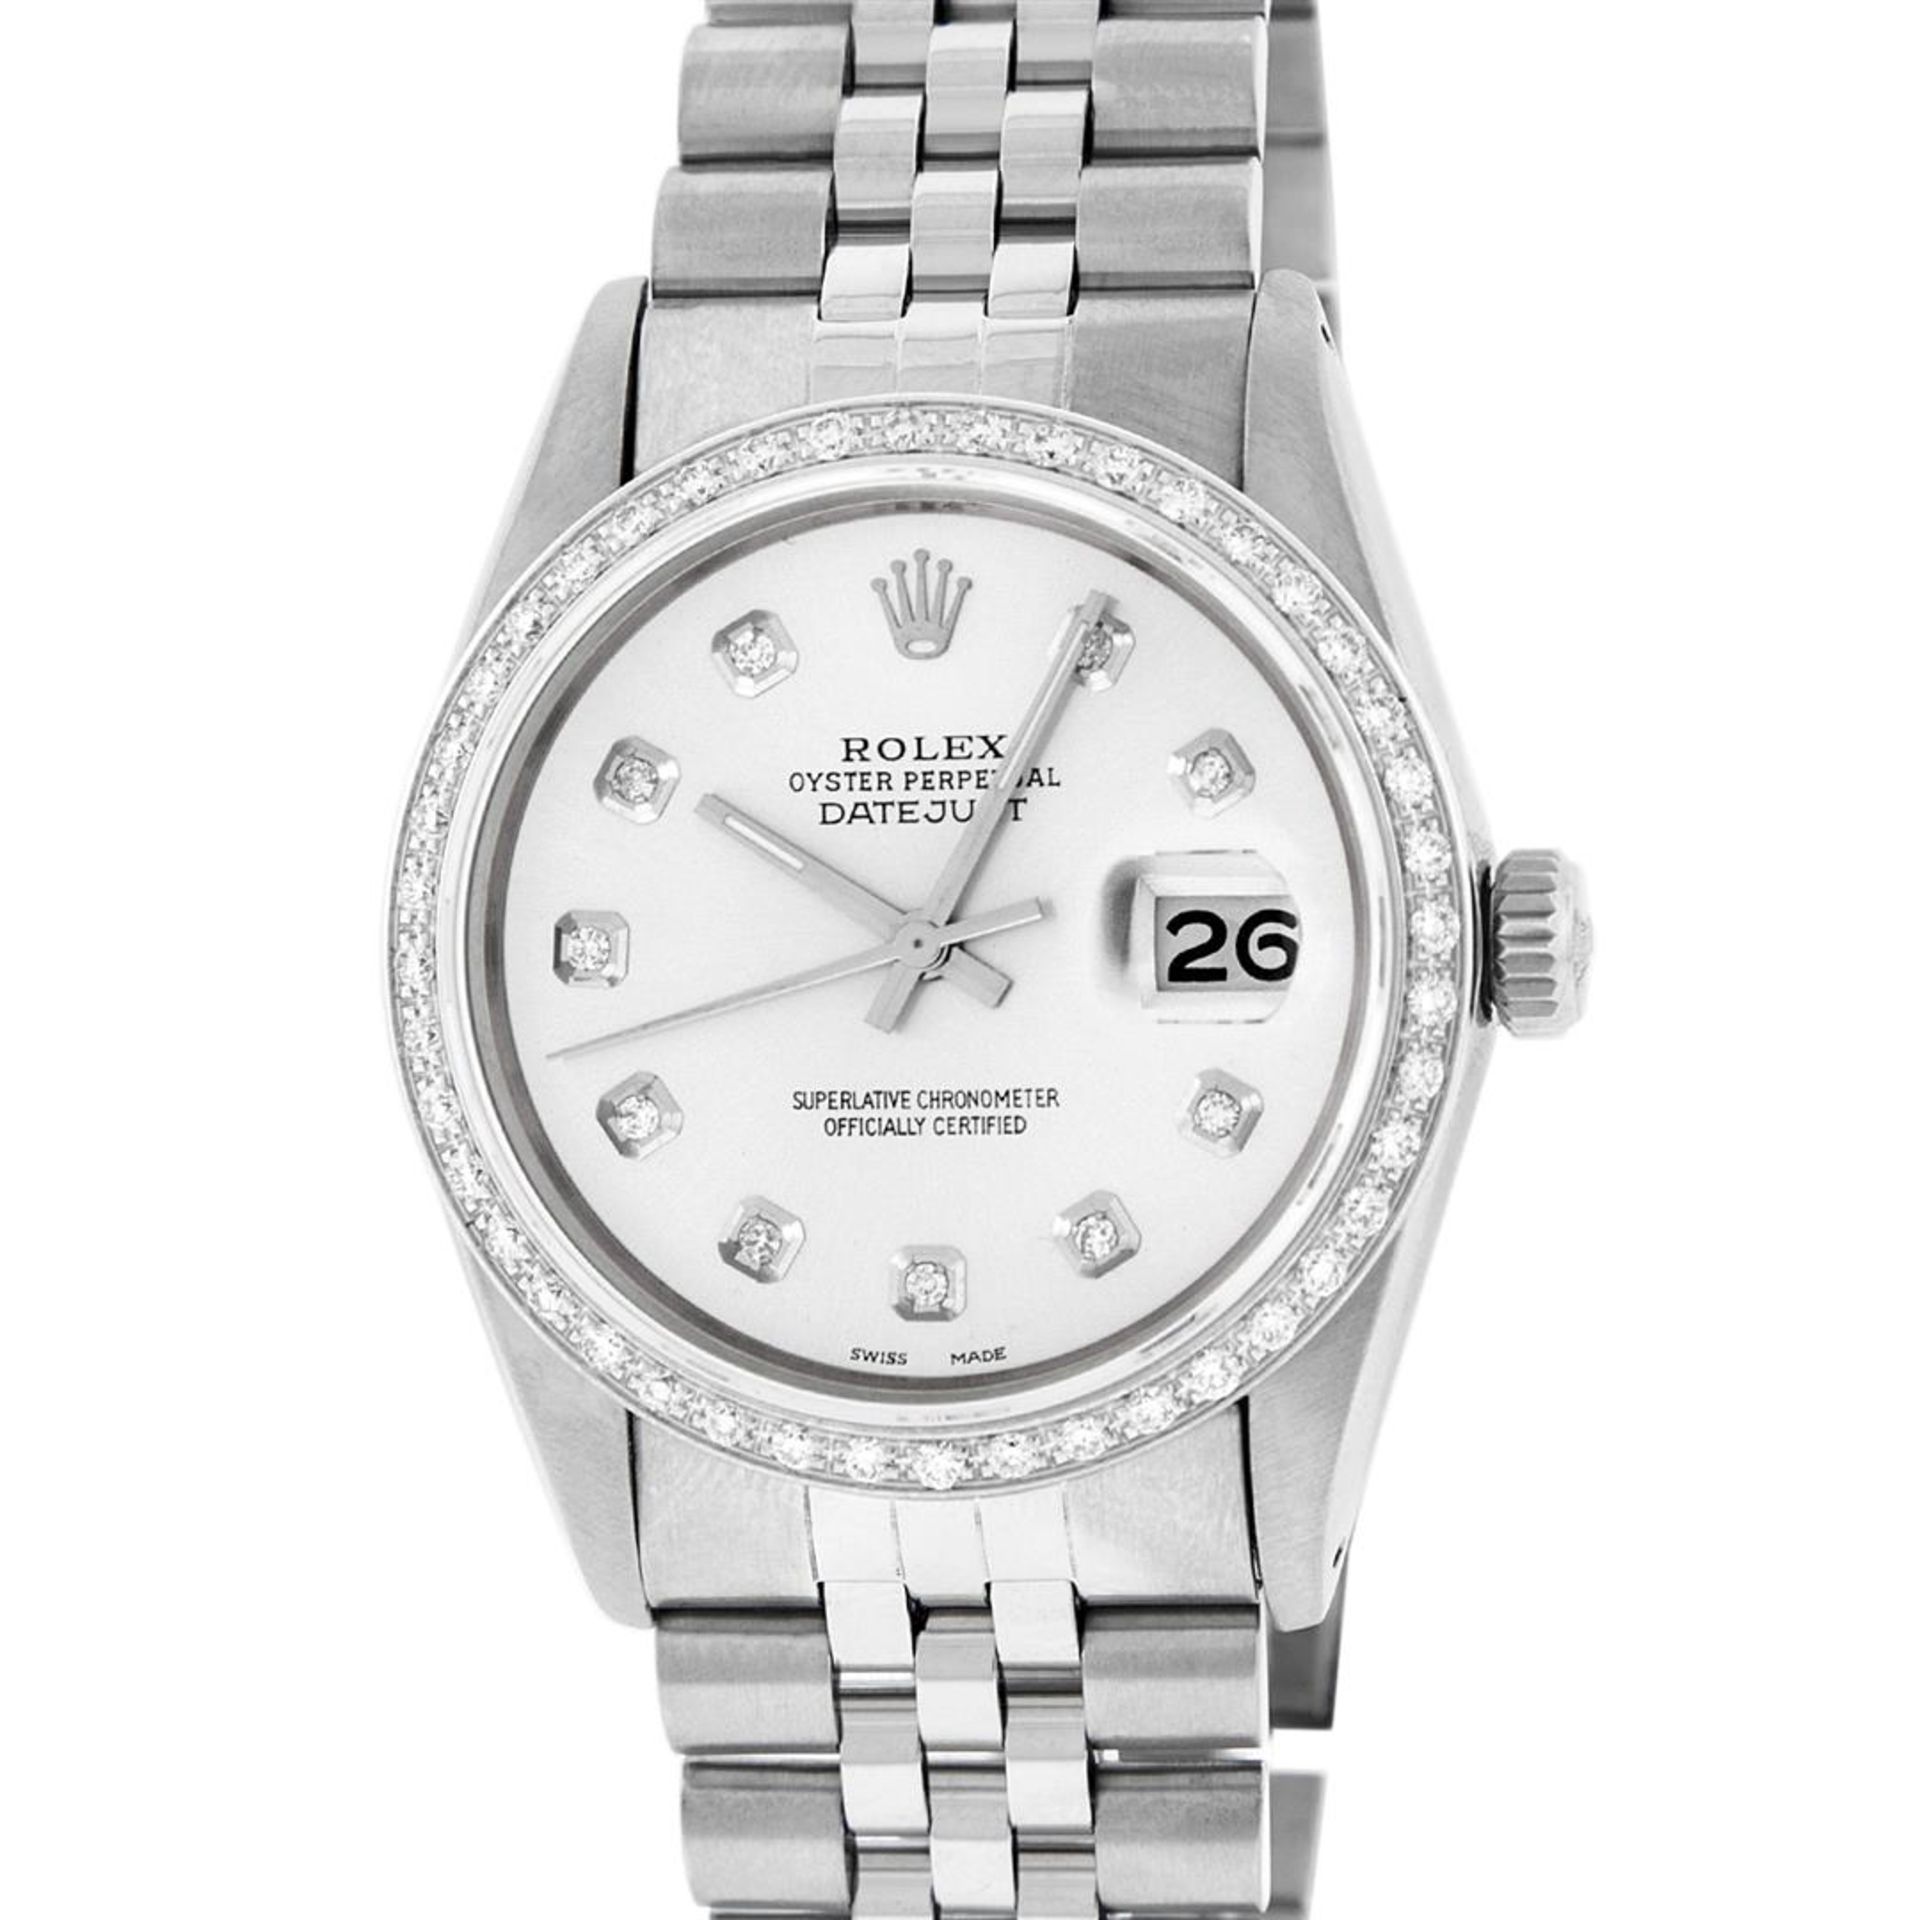 Rolex Mens Datejust 36 Stainless Steel Silver Diamond Oyster Datejust Wristwatch - Image 3 of 9